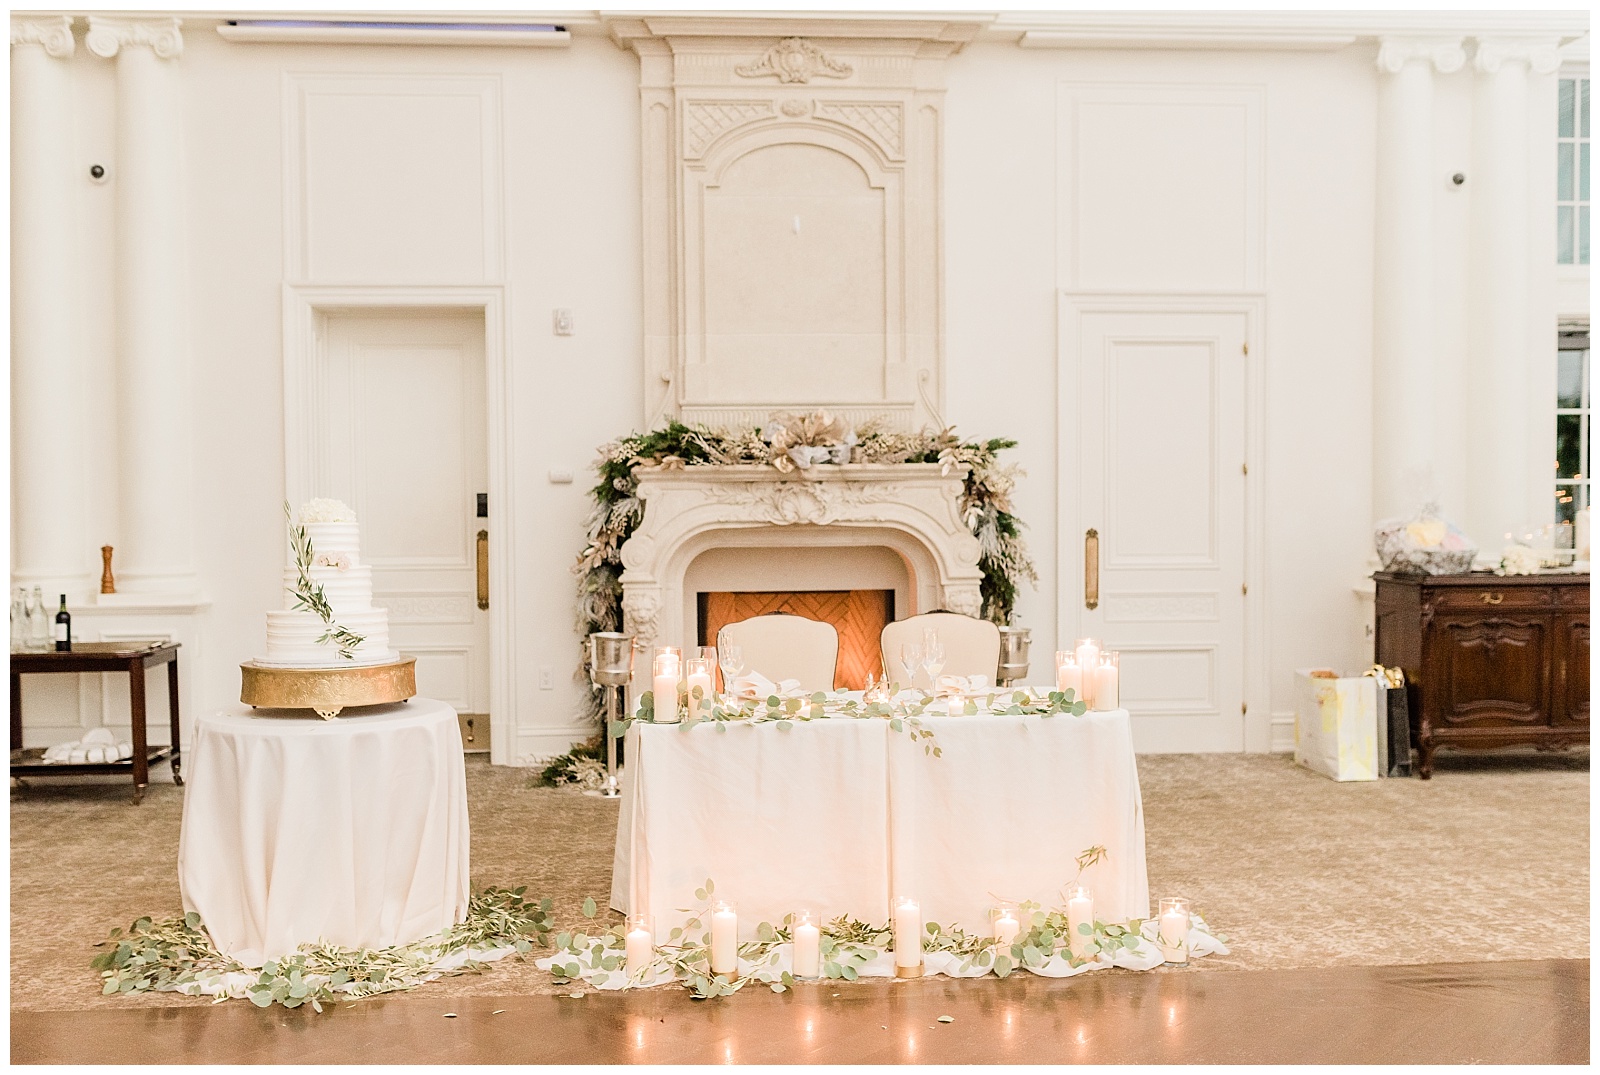 Park Chateau Wedding, Photographer, New Jersey, NJ, Winter, Reception Details, Ballroom, Light and Airy, Sweetheart Table, Cake, Candlelight